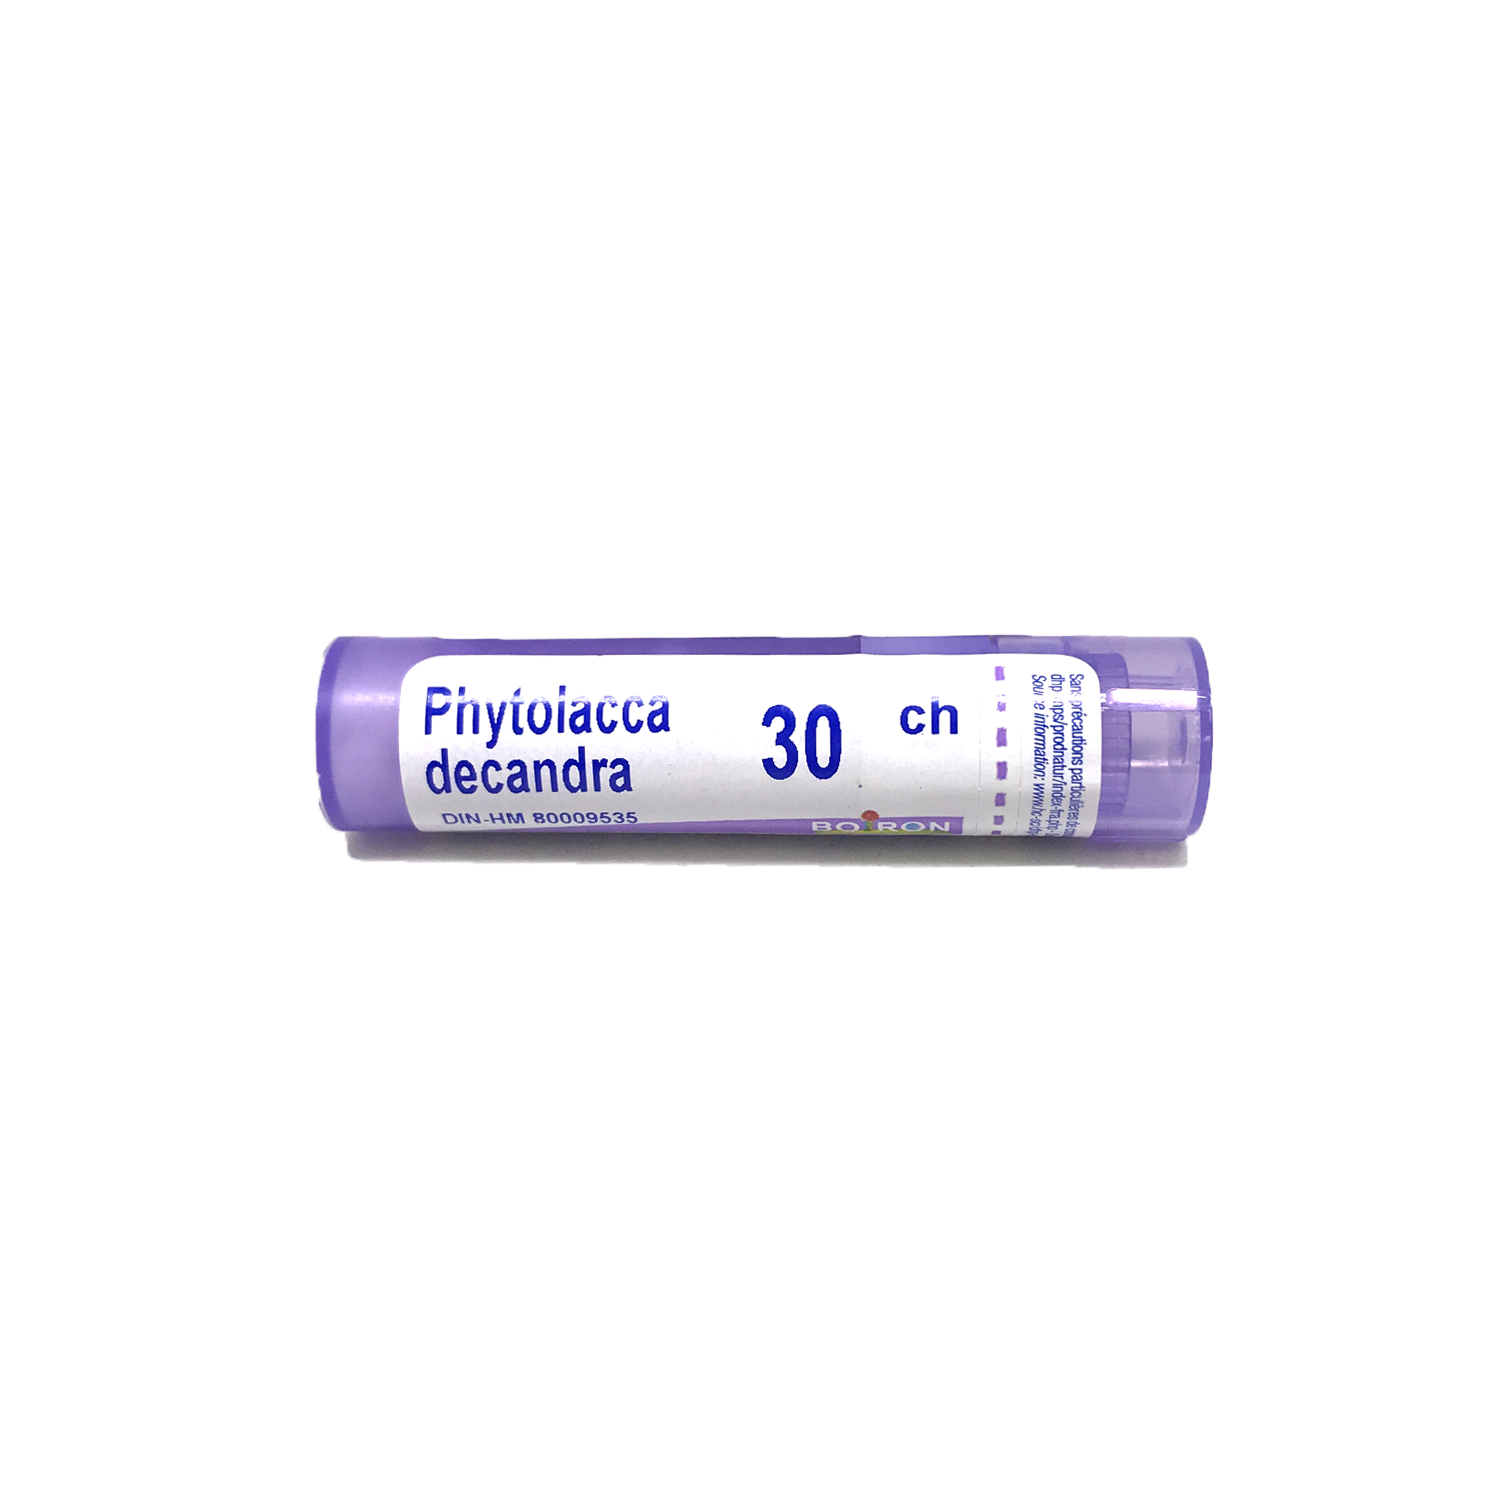 Boiron Phytolacca 30Ch Pellets